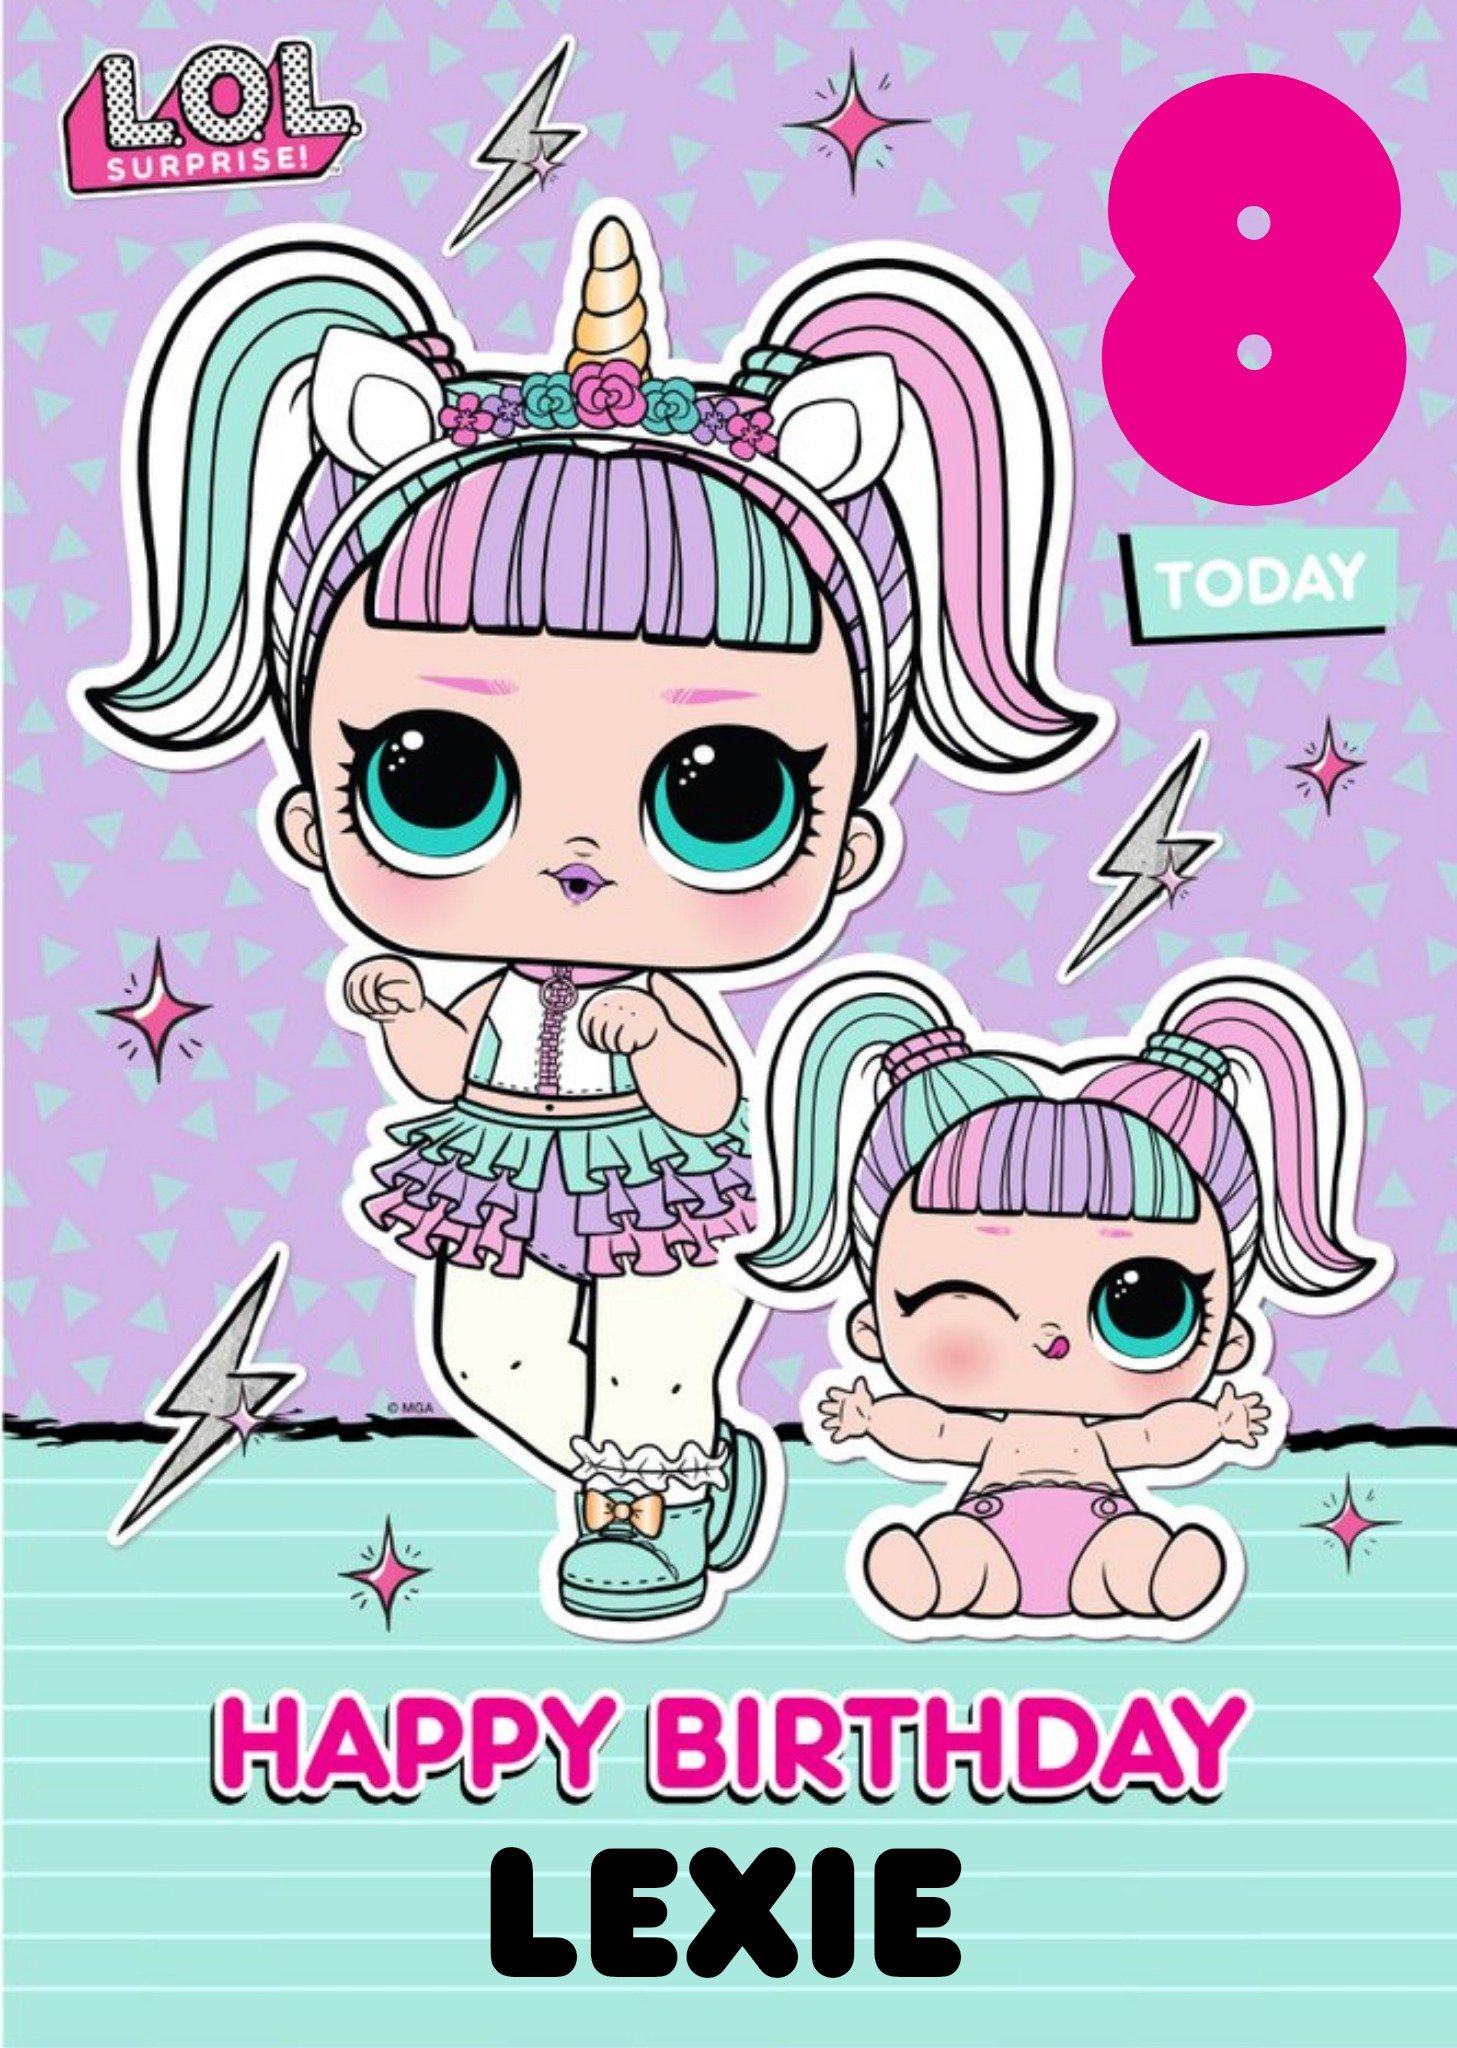 Other Lol Surprise 8 Today Birthday Card, Large